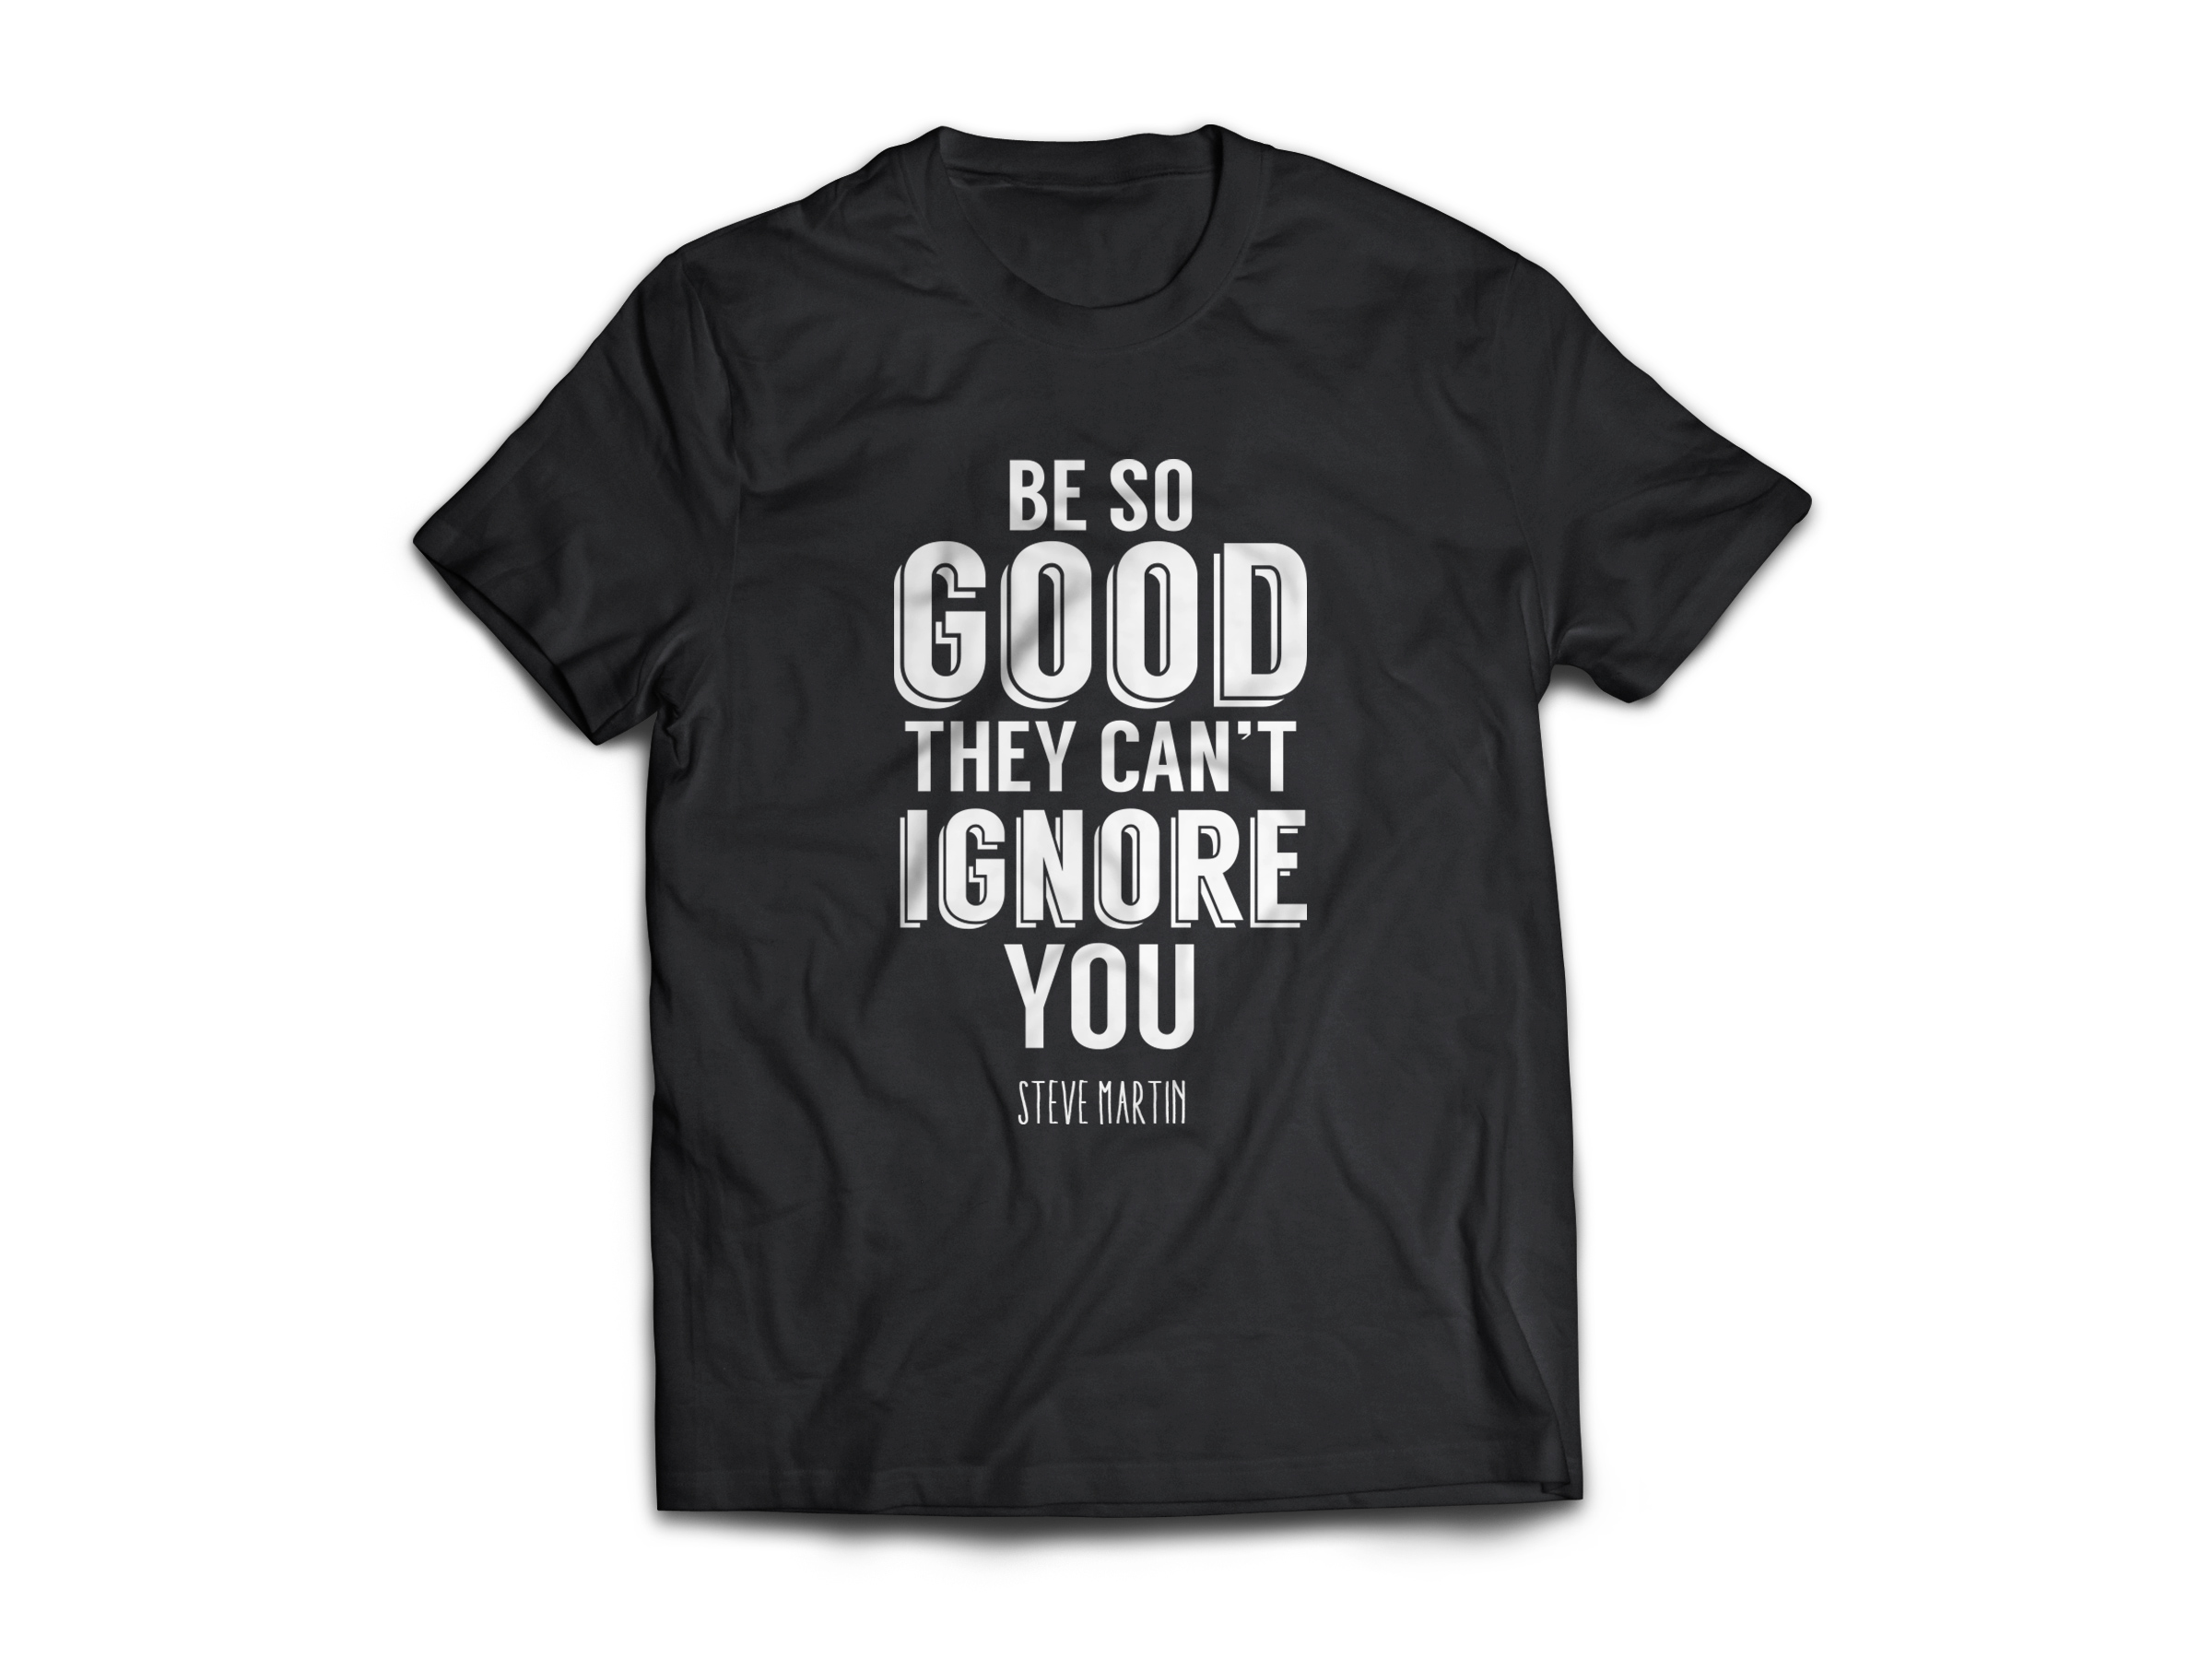 Be so good they can't ignore you. #CreativeSummer14 - Outsource Marketing